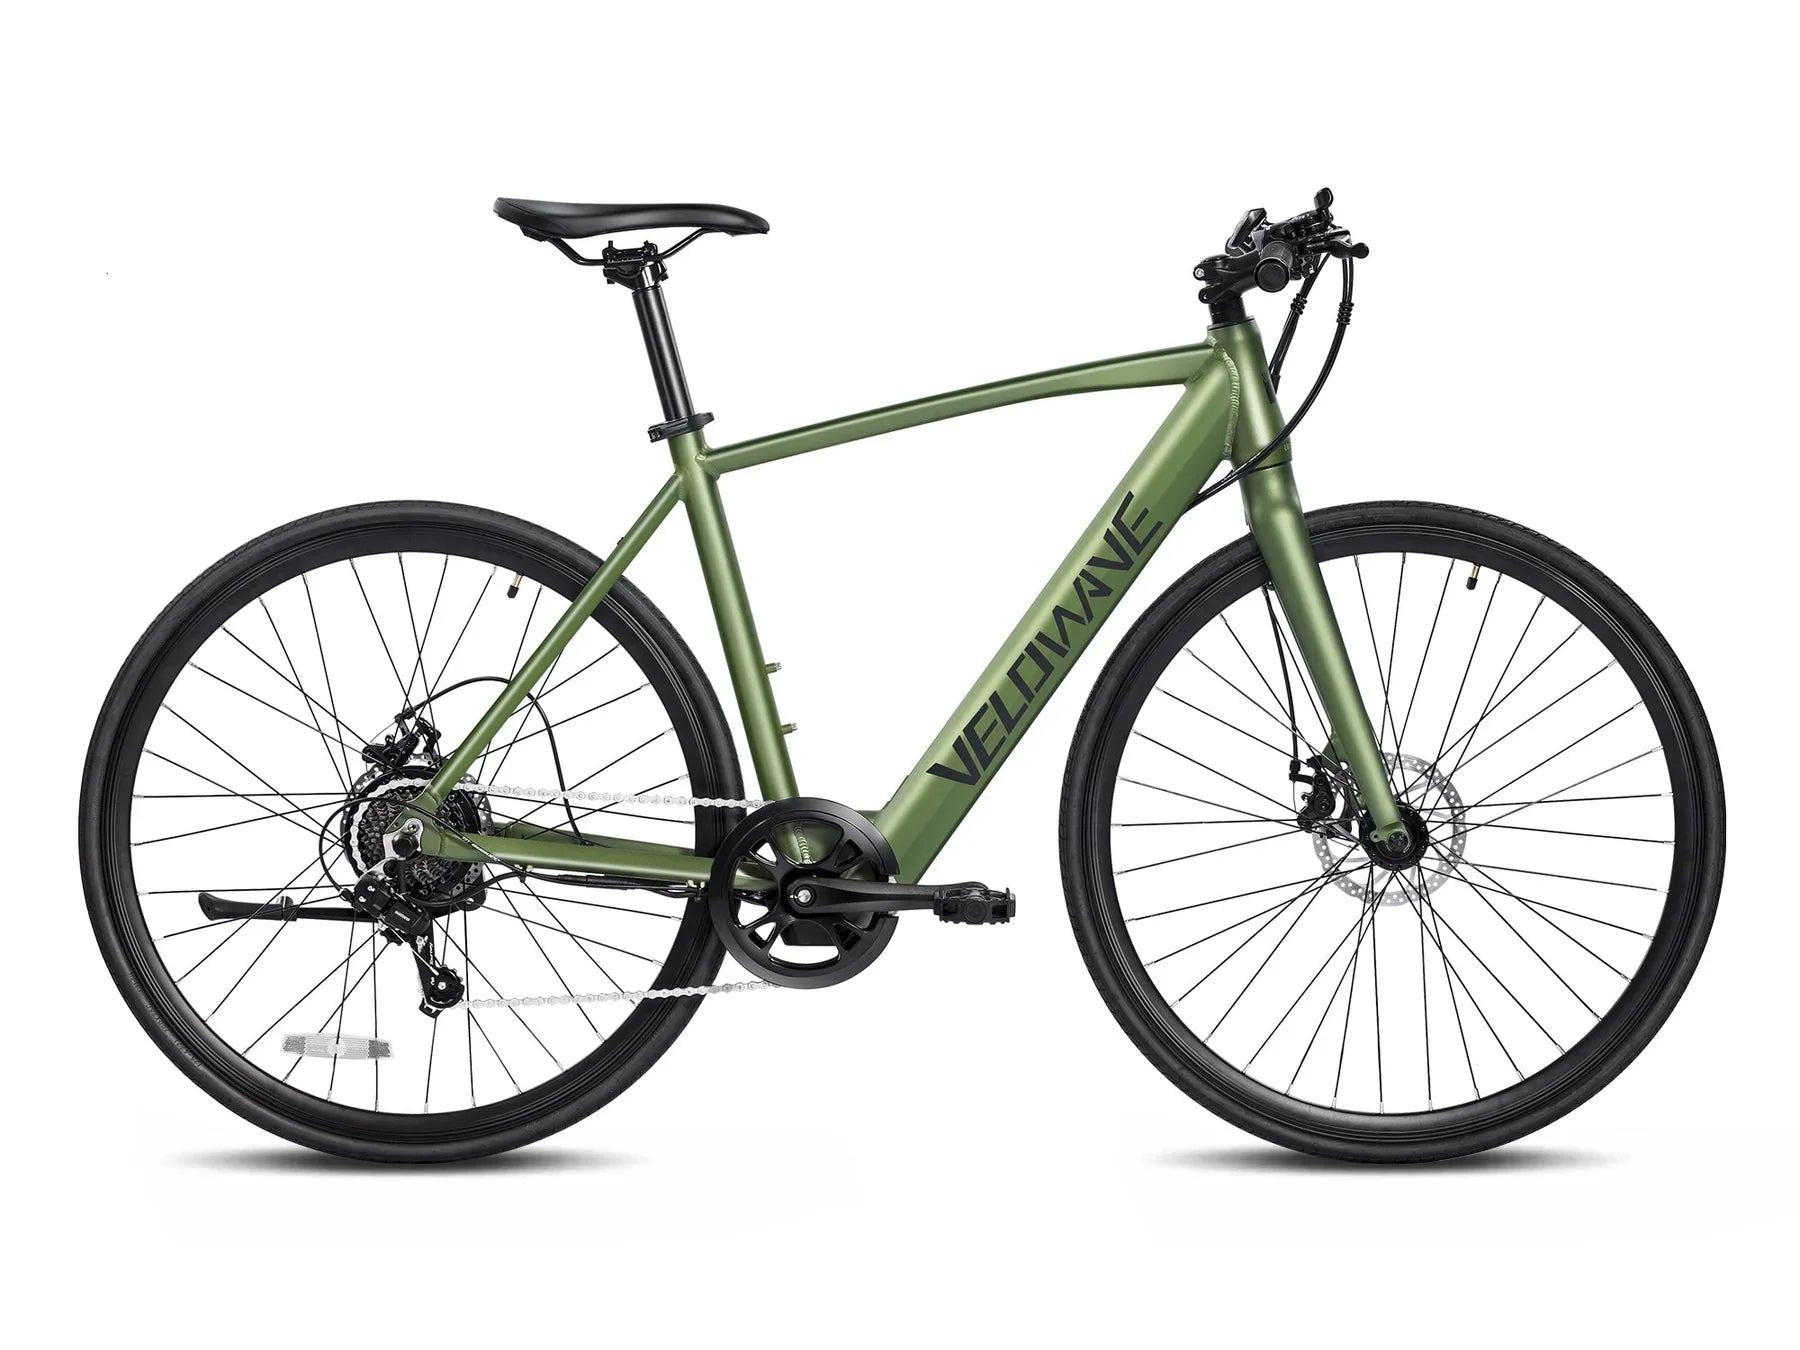 Sleek green Velowave Spirit Electric Road Bike in urban setting, showcasing its lightweight design and advanced features for efficient city commuting.